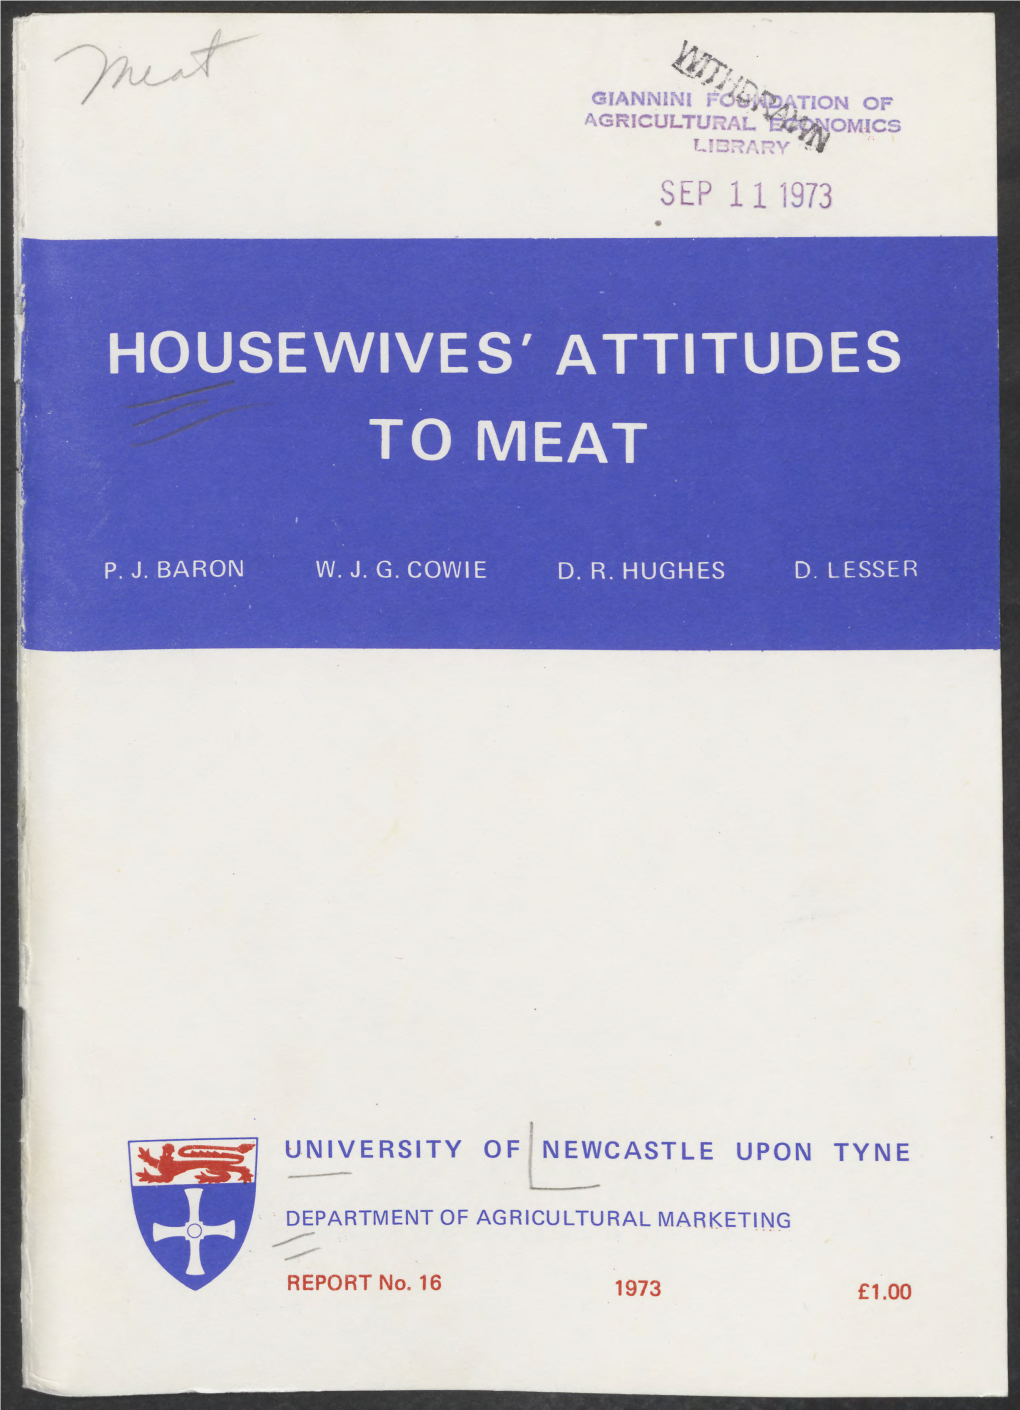 Housewives' Attitudes to Meat